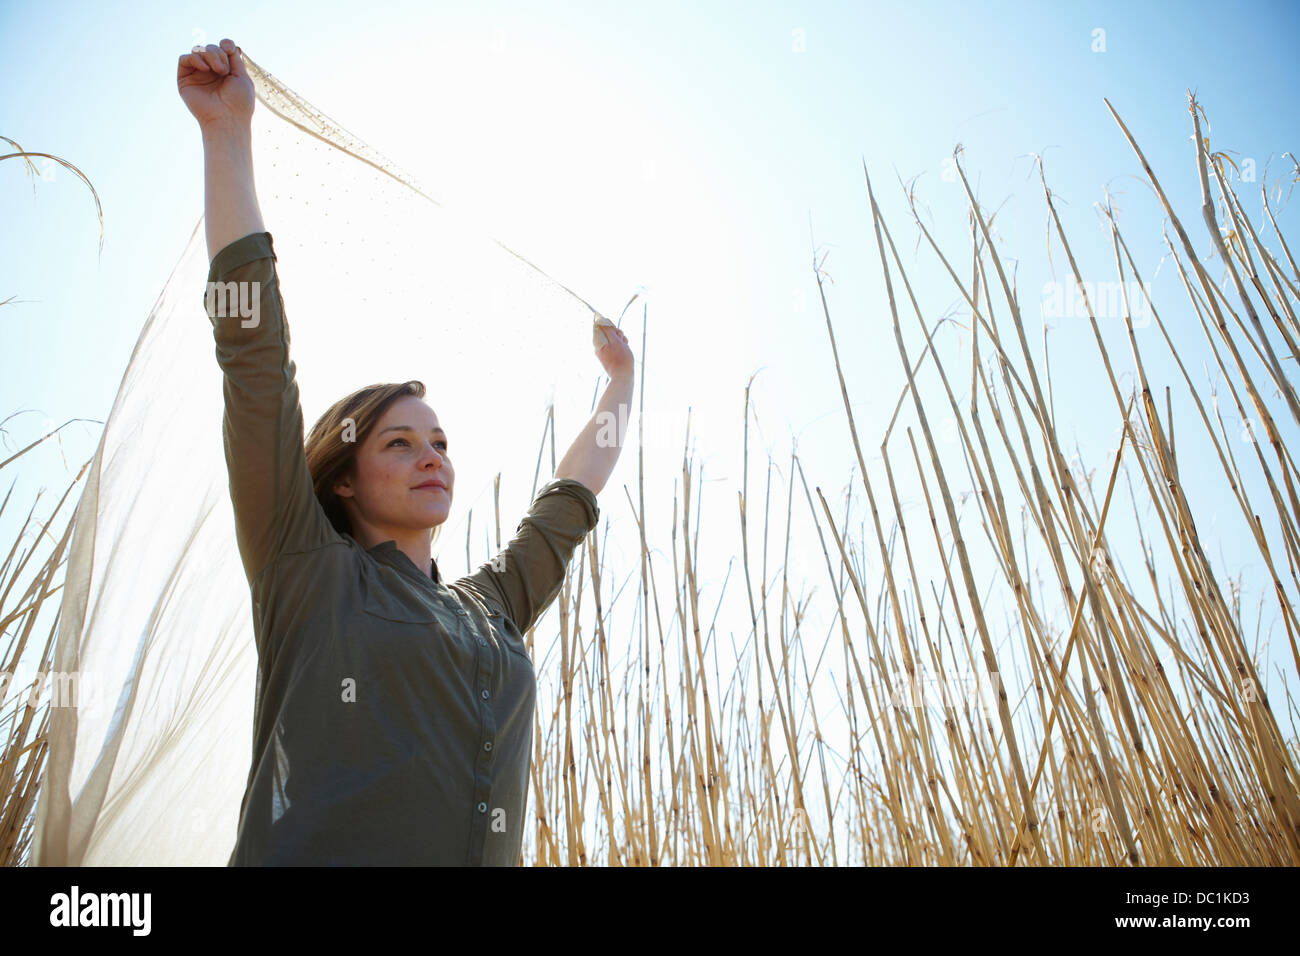 Young woman holding up scarf in reeds Stock Photo